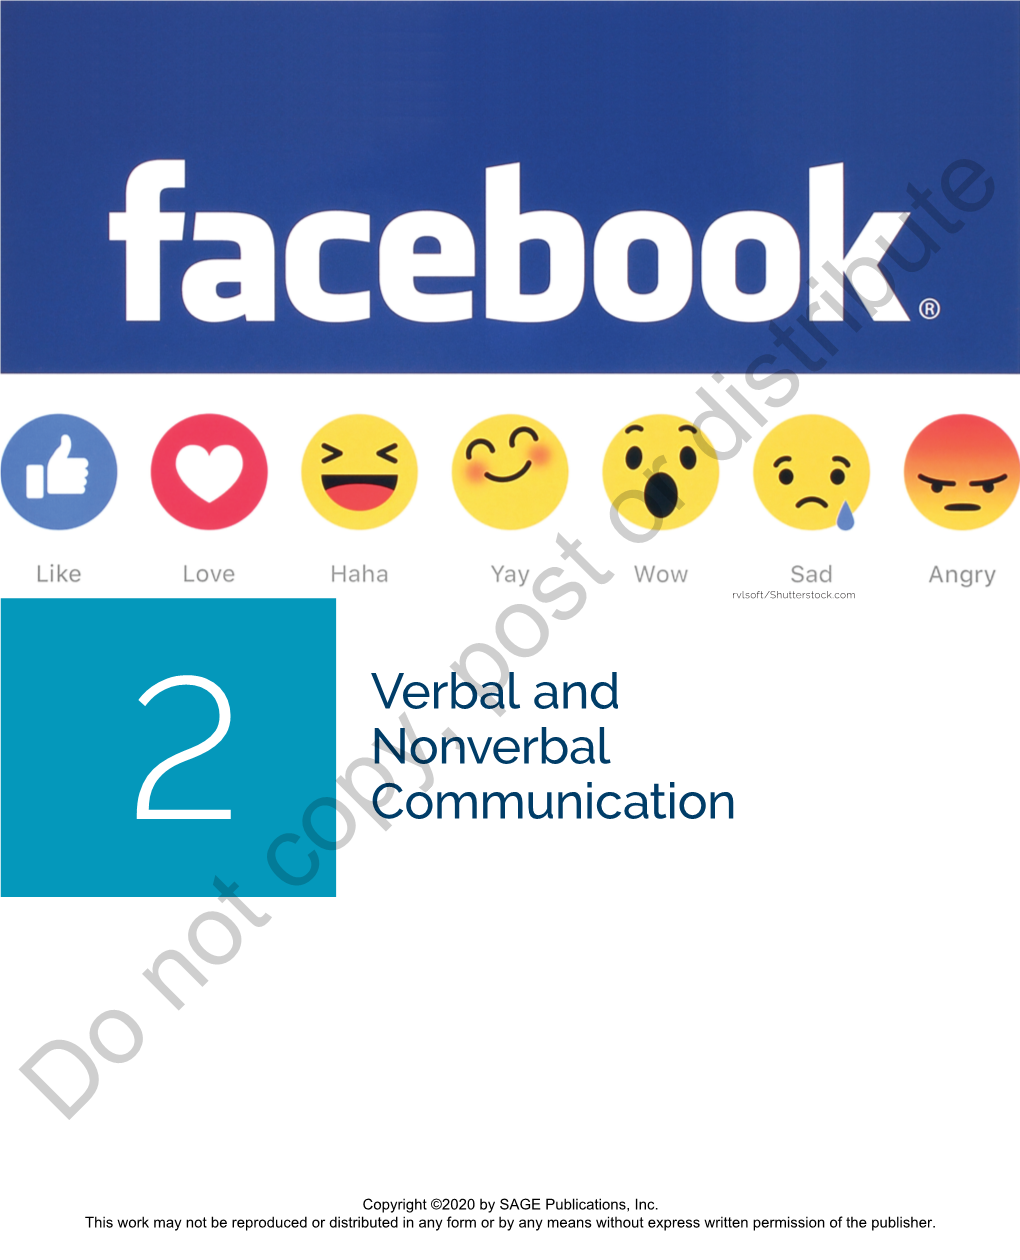 Chapter 2. Verbal and Nonverbal Communication